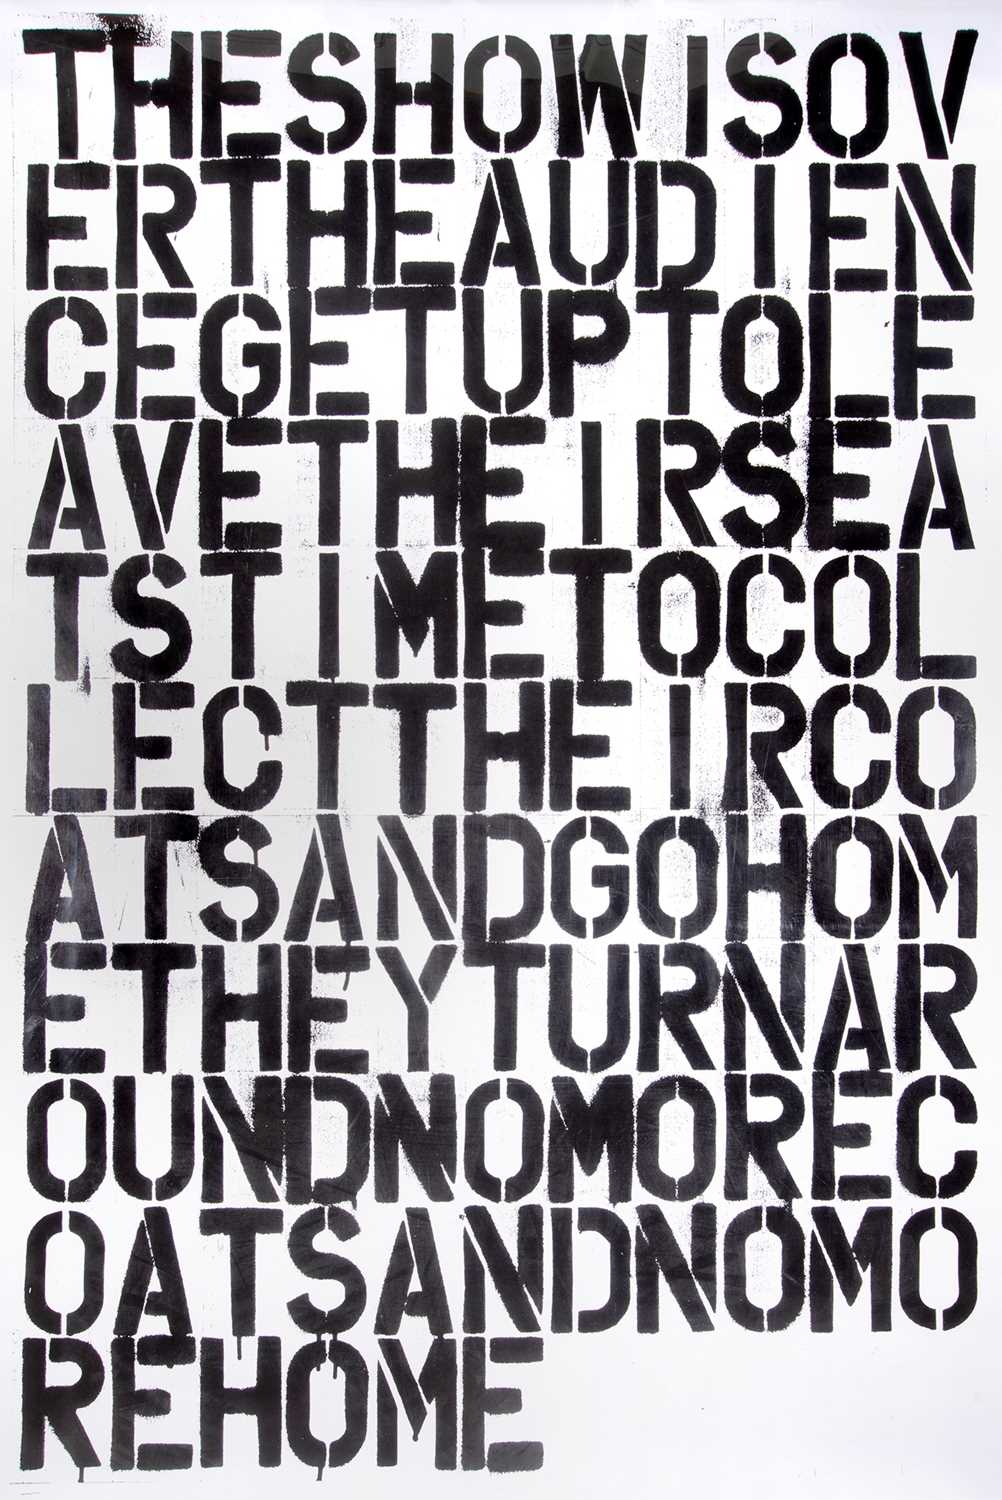 Lot 8 - Christopher Wool (American 1955-) & Felix Gonzalez-Torres (Cuban 1957-1996), 'Untitled (The Show Is Over)’, 1993